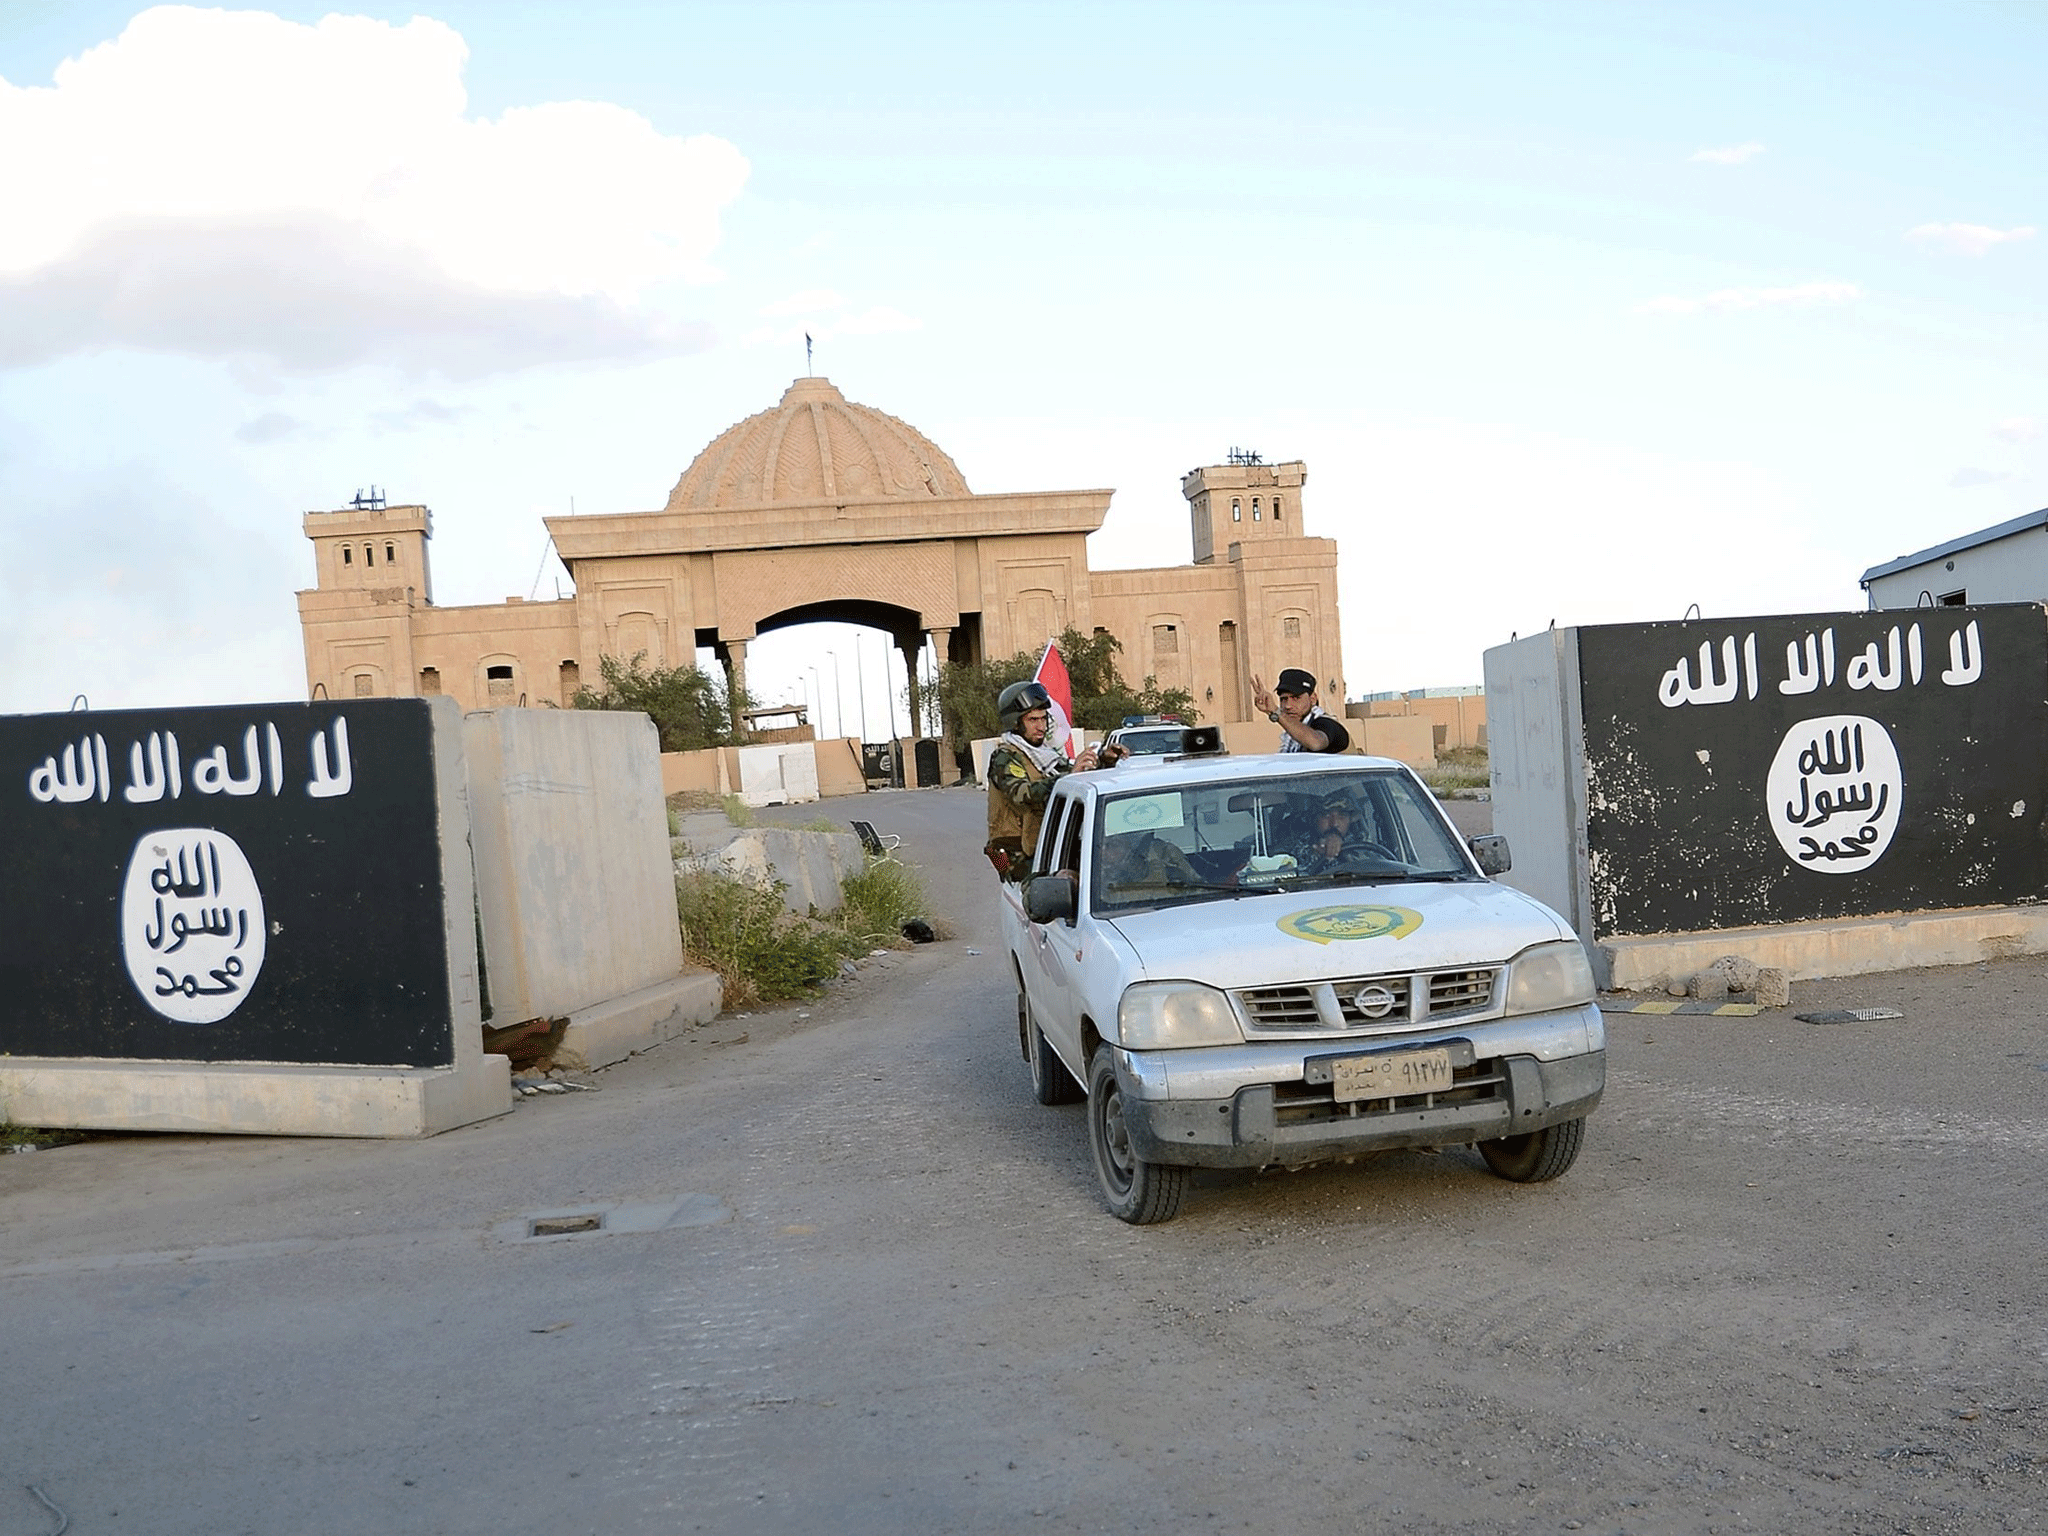 Shia paramilitary fighters ride past a wall painted with the black flag commonly used by Isis militants, with the palaces of former Iraqi president Saddam Hussein behind them, in Tikrit, March 31, 2015